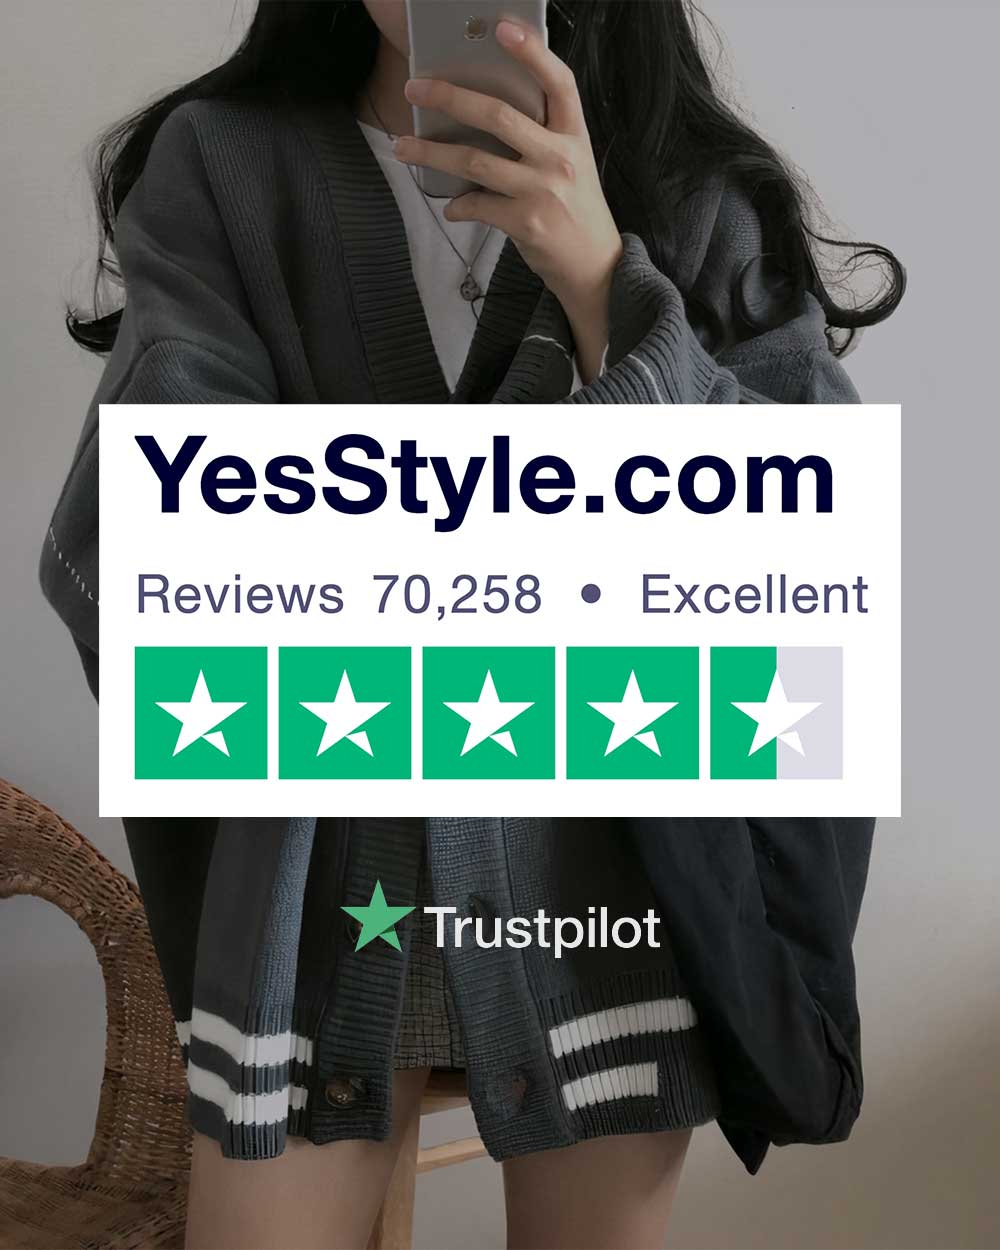 Yes Style Review - is it legit and safe to shop from?